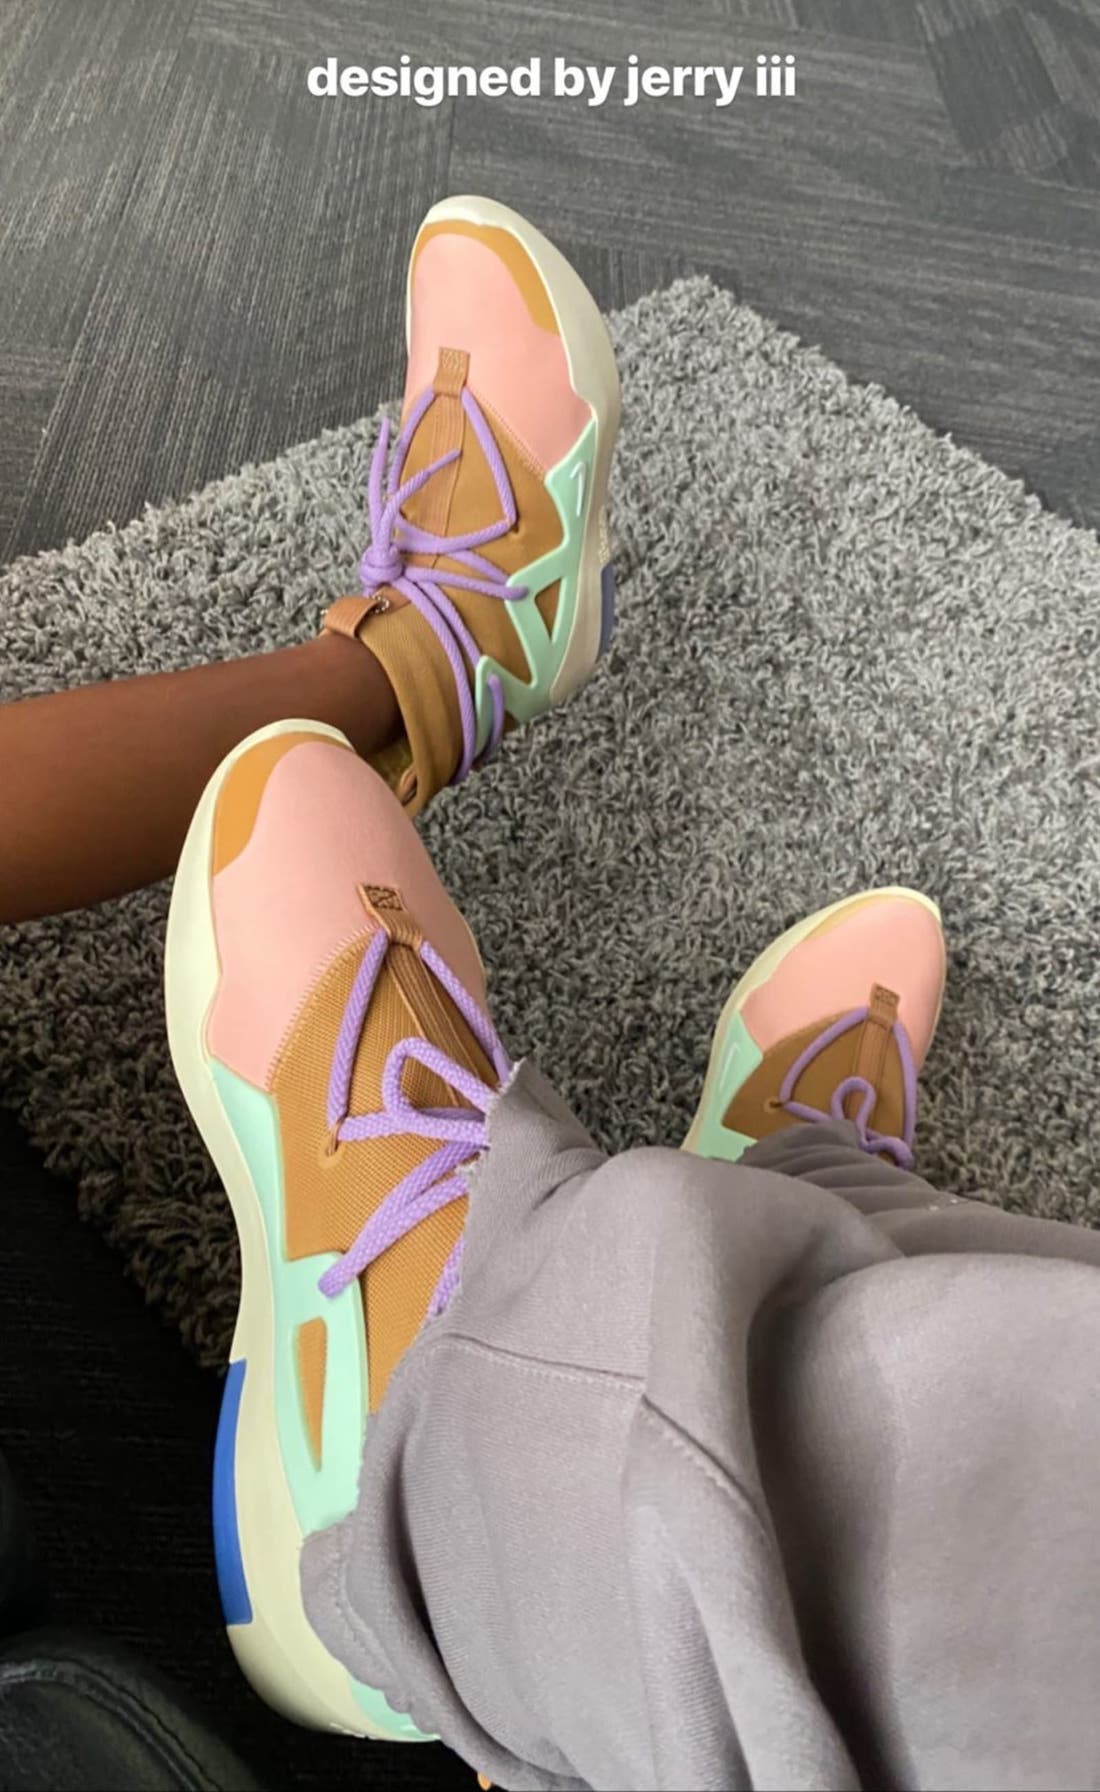 Nike Air Fear of God 1 Multi-Color Jerry III Sample